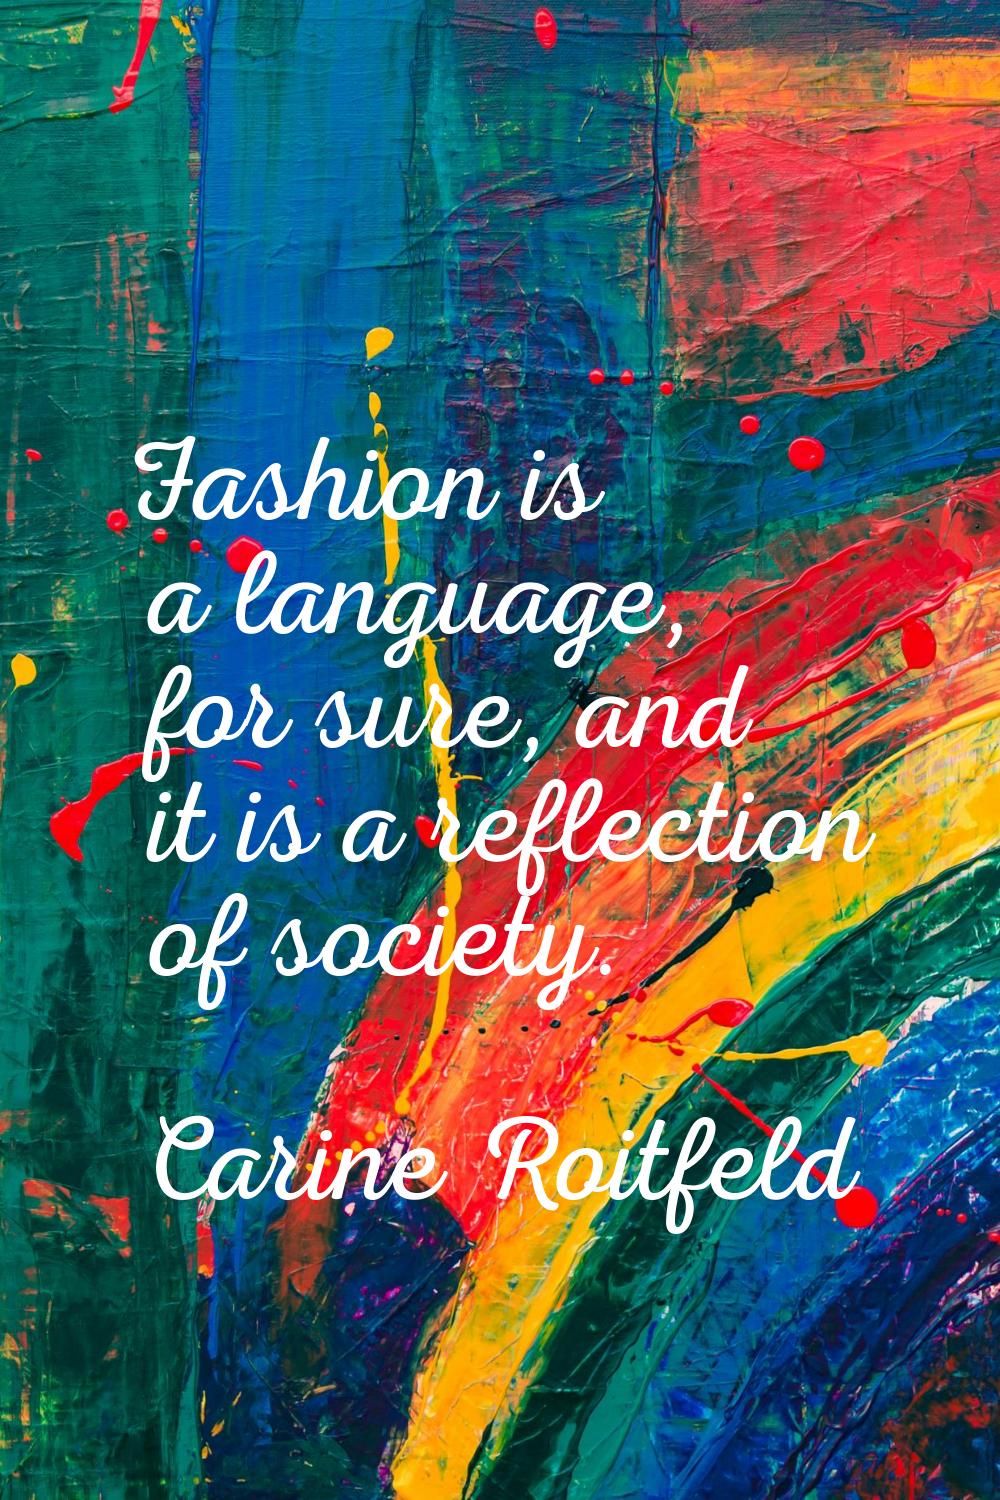 Fashion is a language, for sure, and it is a reflection of society.